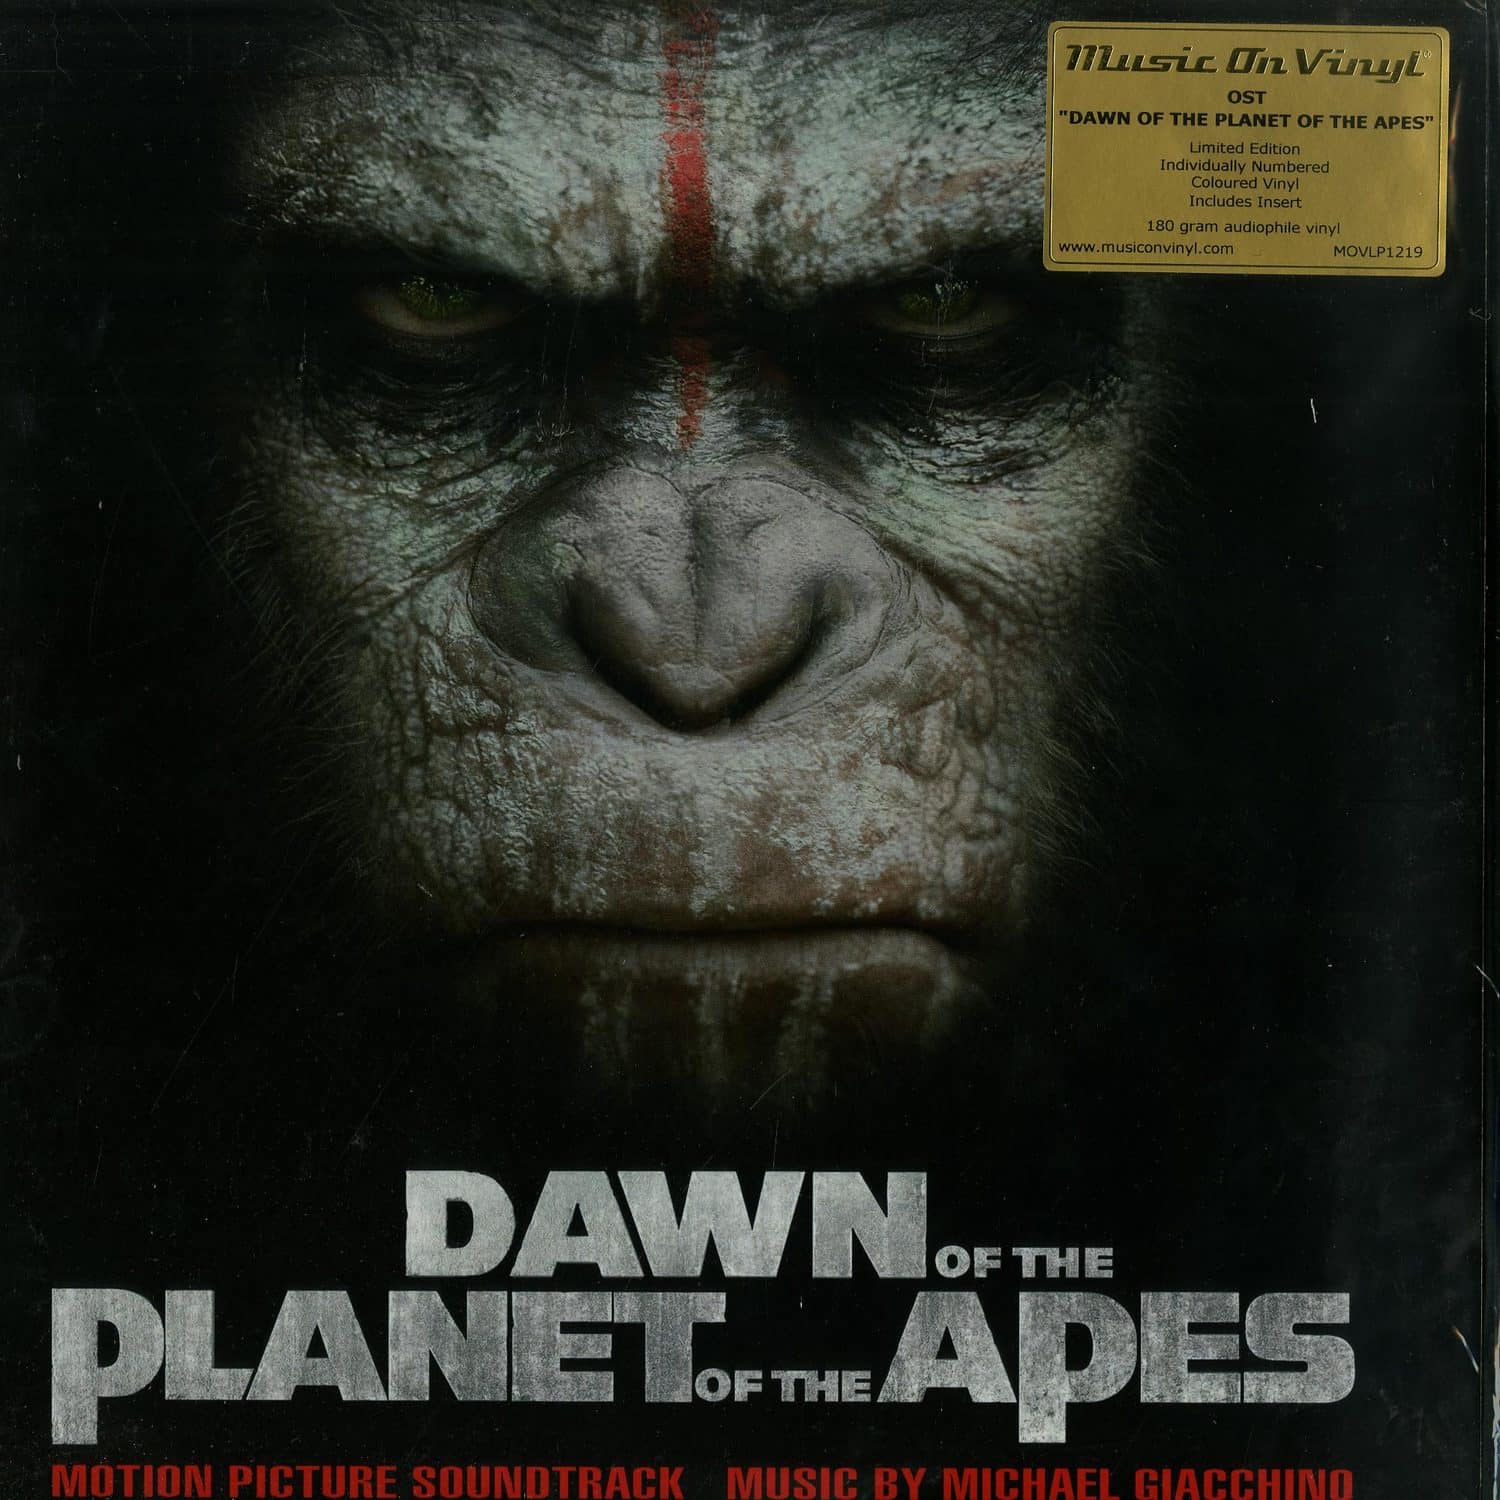 Michael Giacchino - DAWN OF THE PLANET OF THE APES O.S.T. 